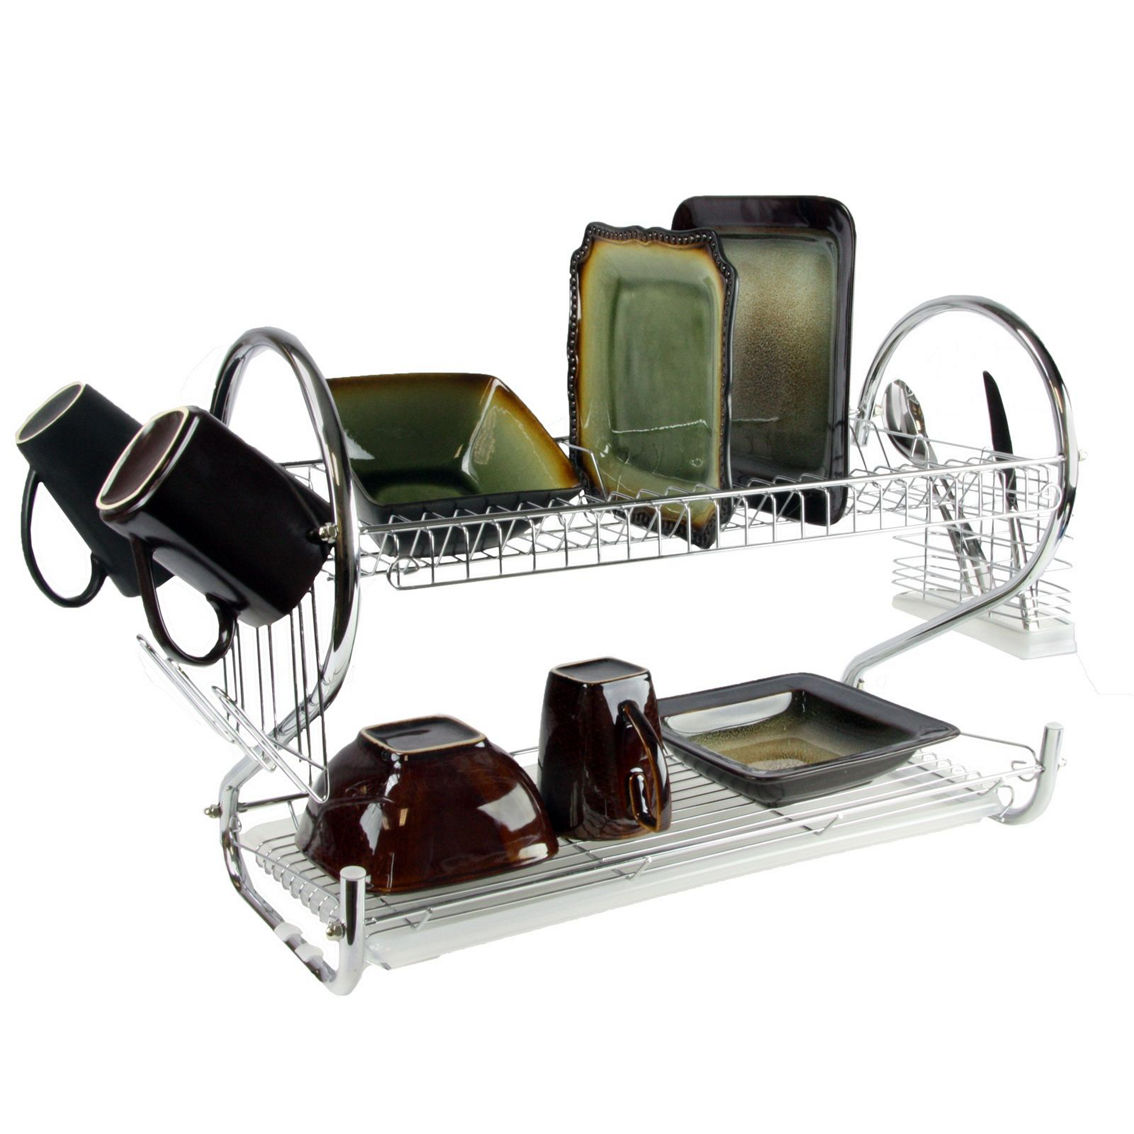 MegaChef 16 Inch Two Shelf Dish Rack with Easily Removable Draining Tray, 6 Cup - Image 5 of 5